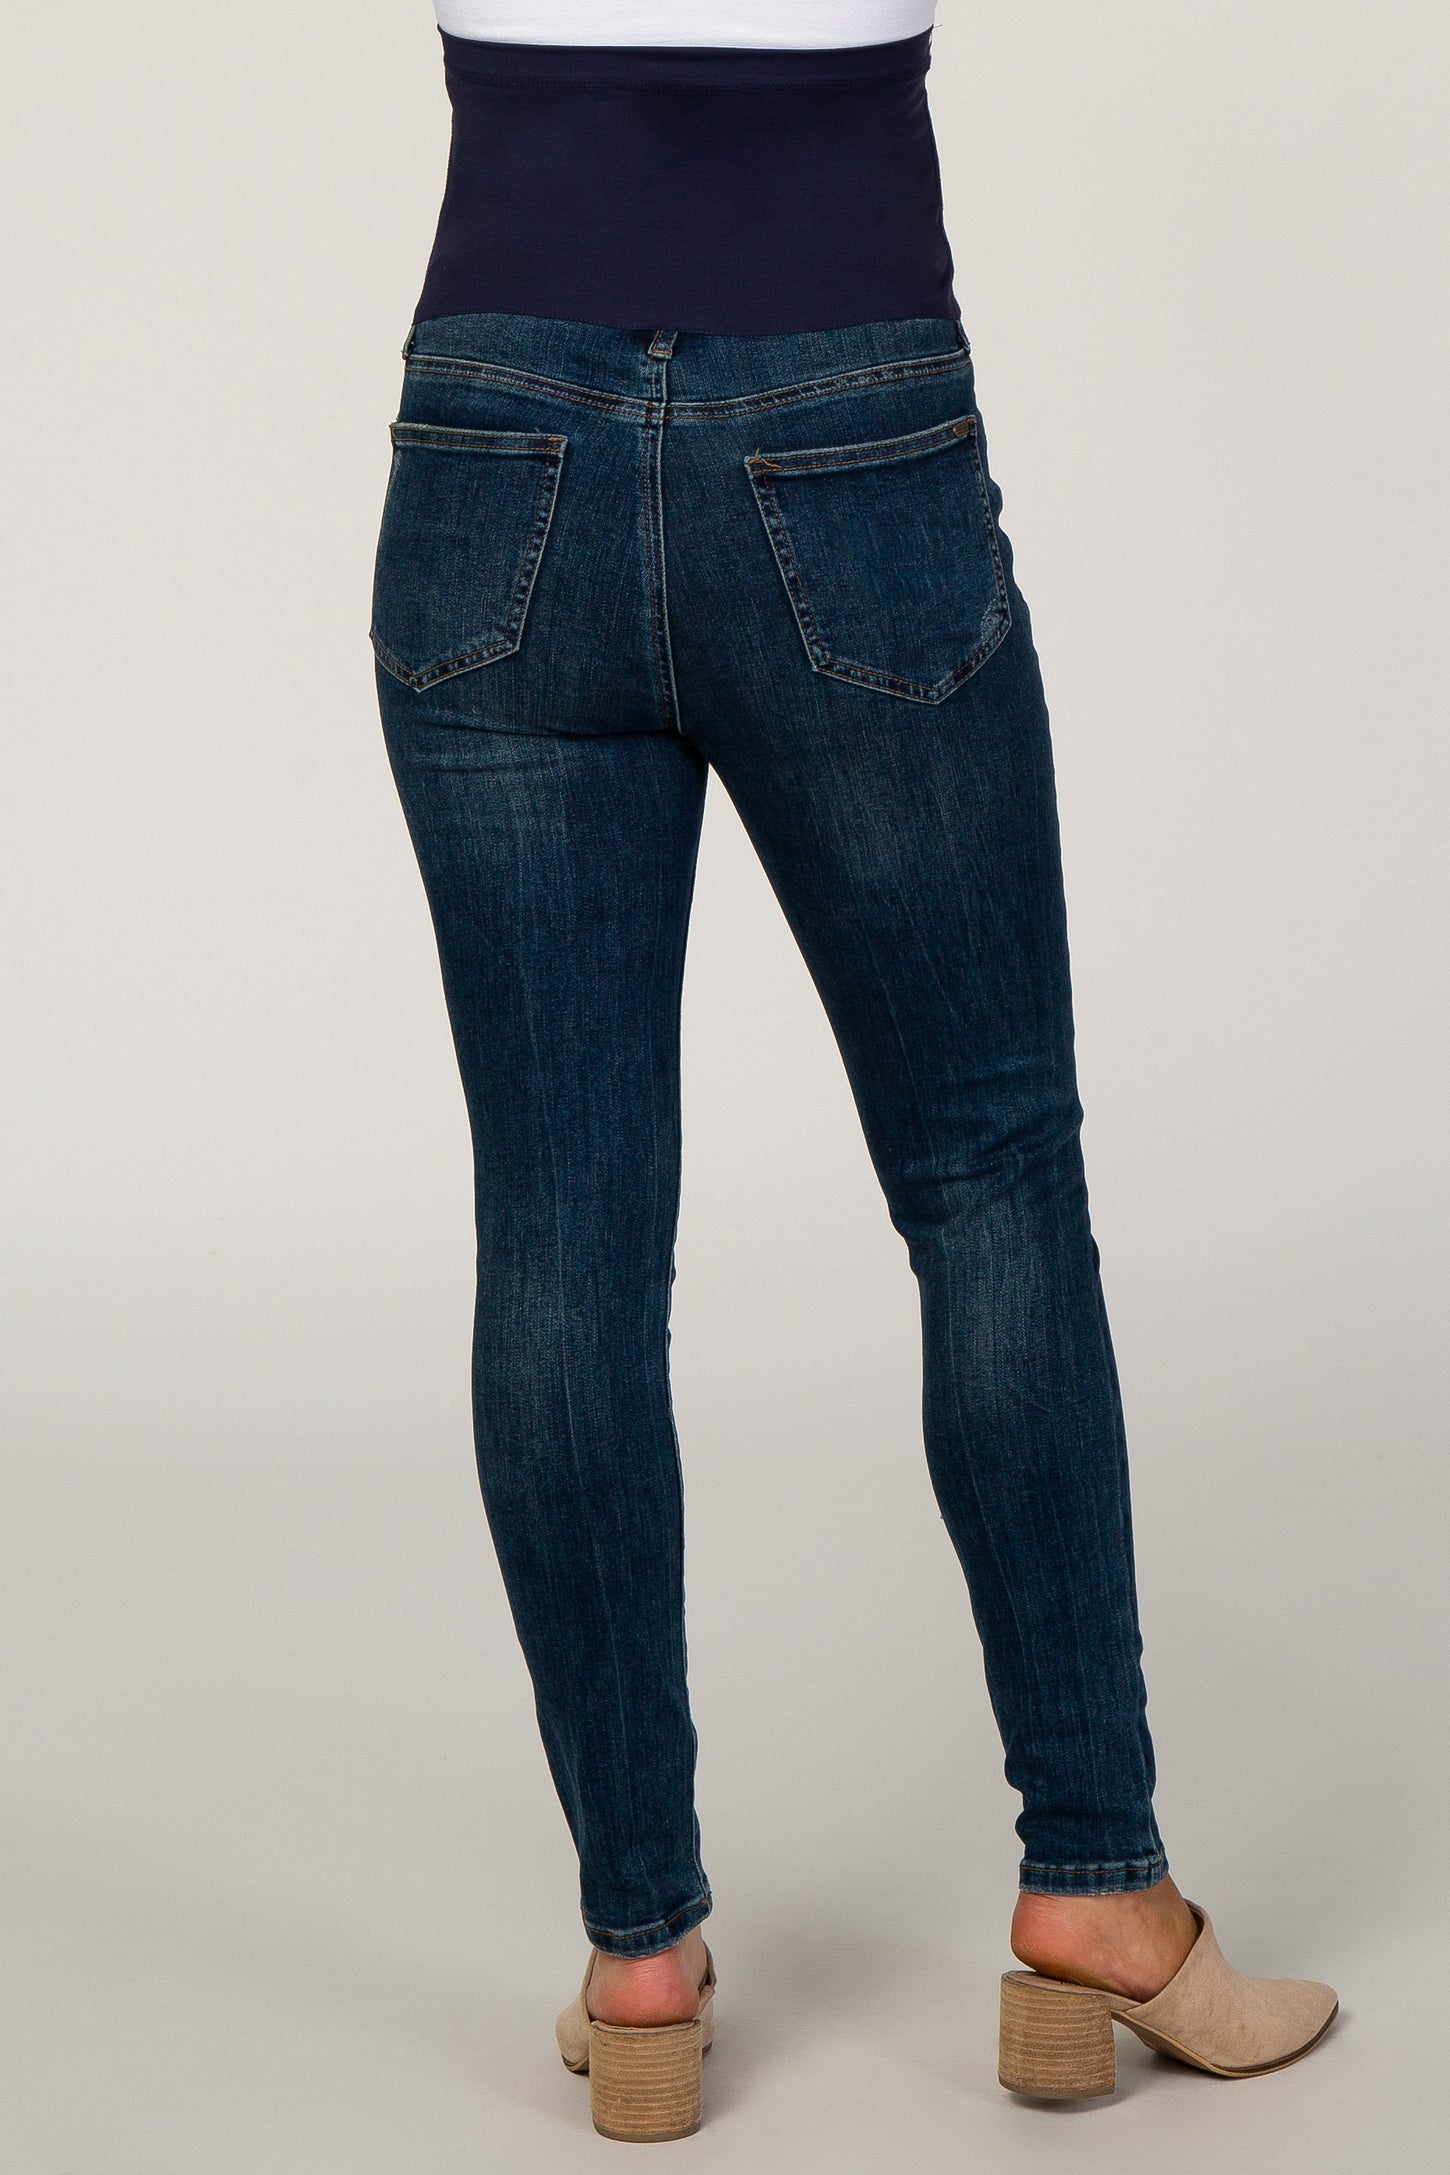 PinkBlush Navy Blue Lightly Distressed Maternity Jeans